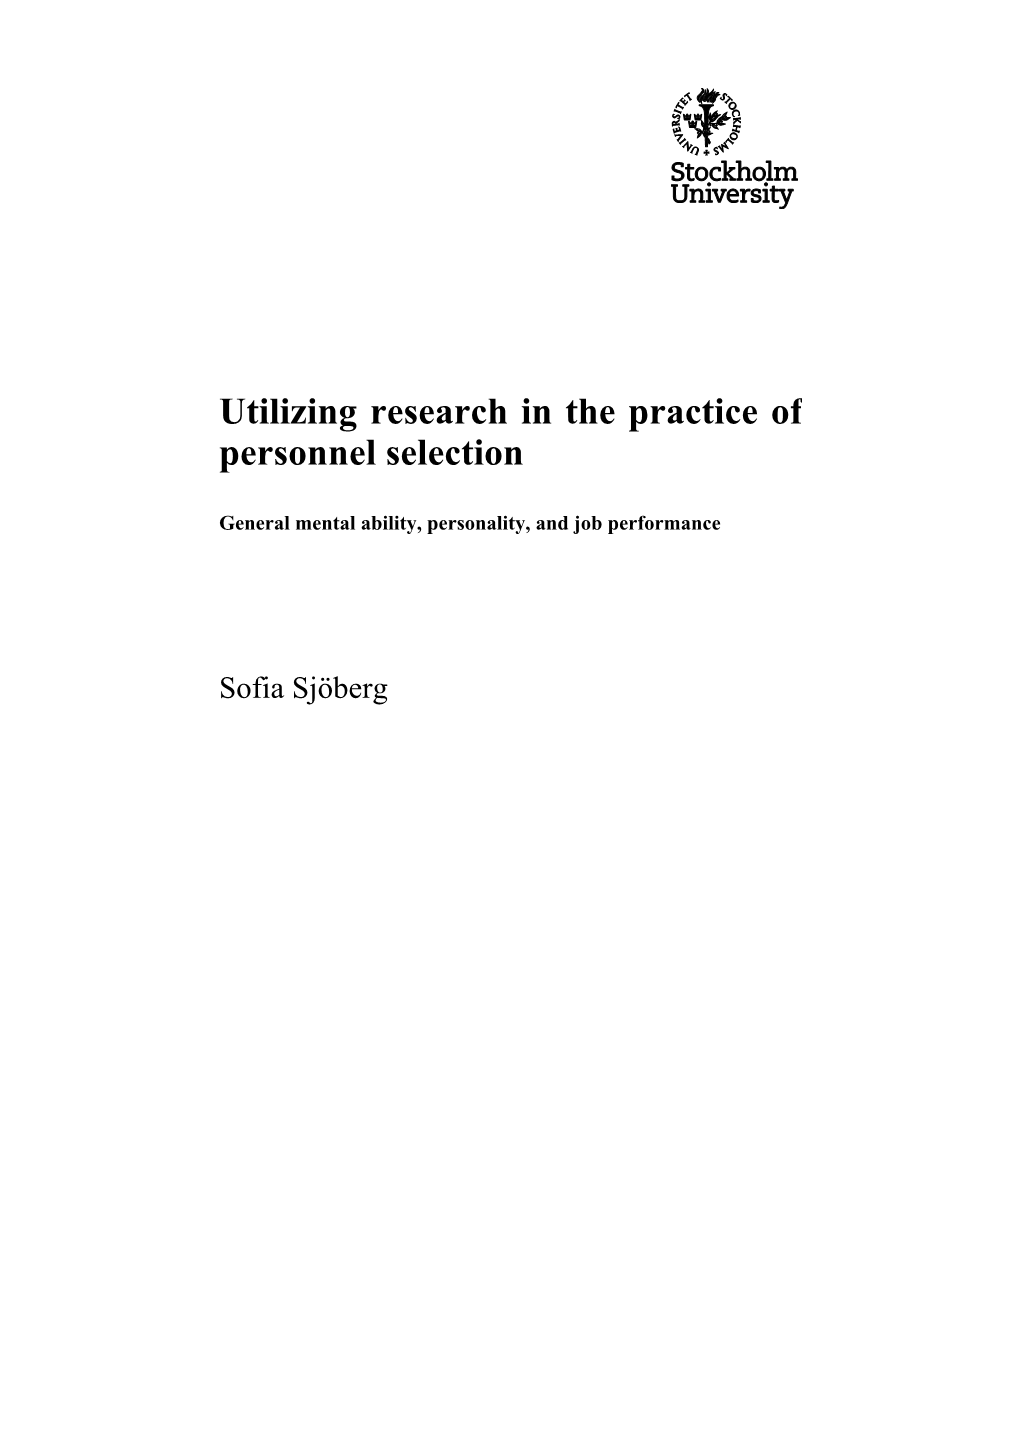 Utilizing Research in the Practice of Personnel Selection